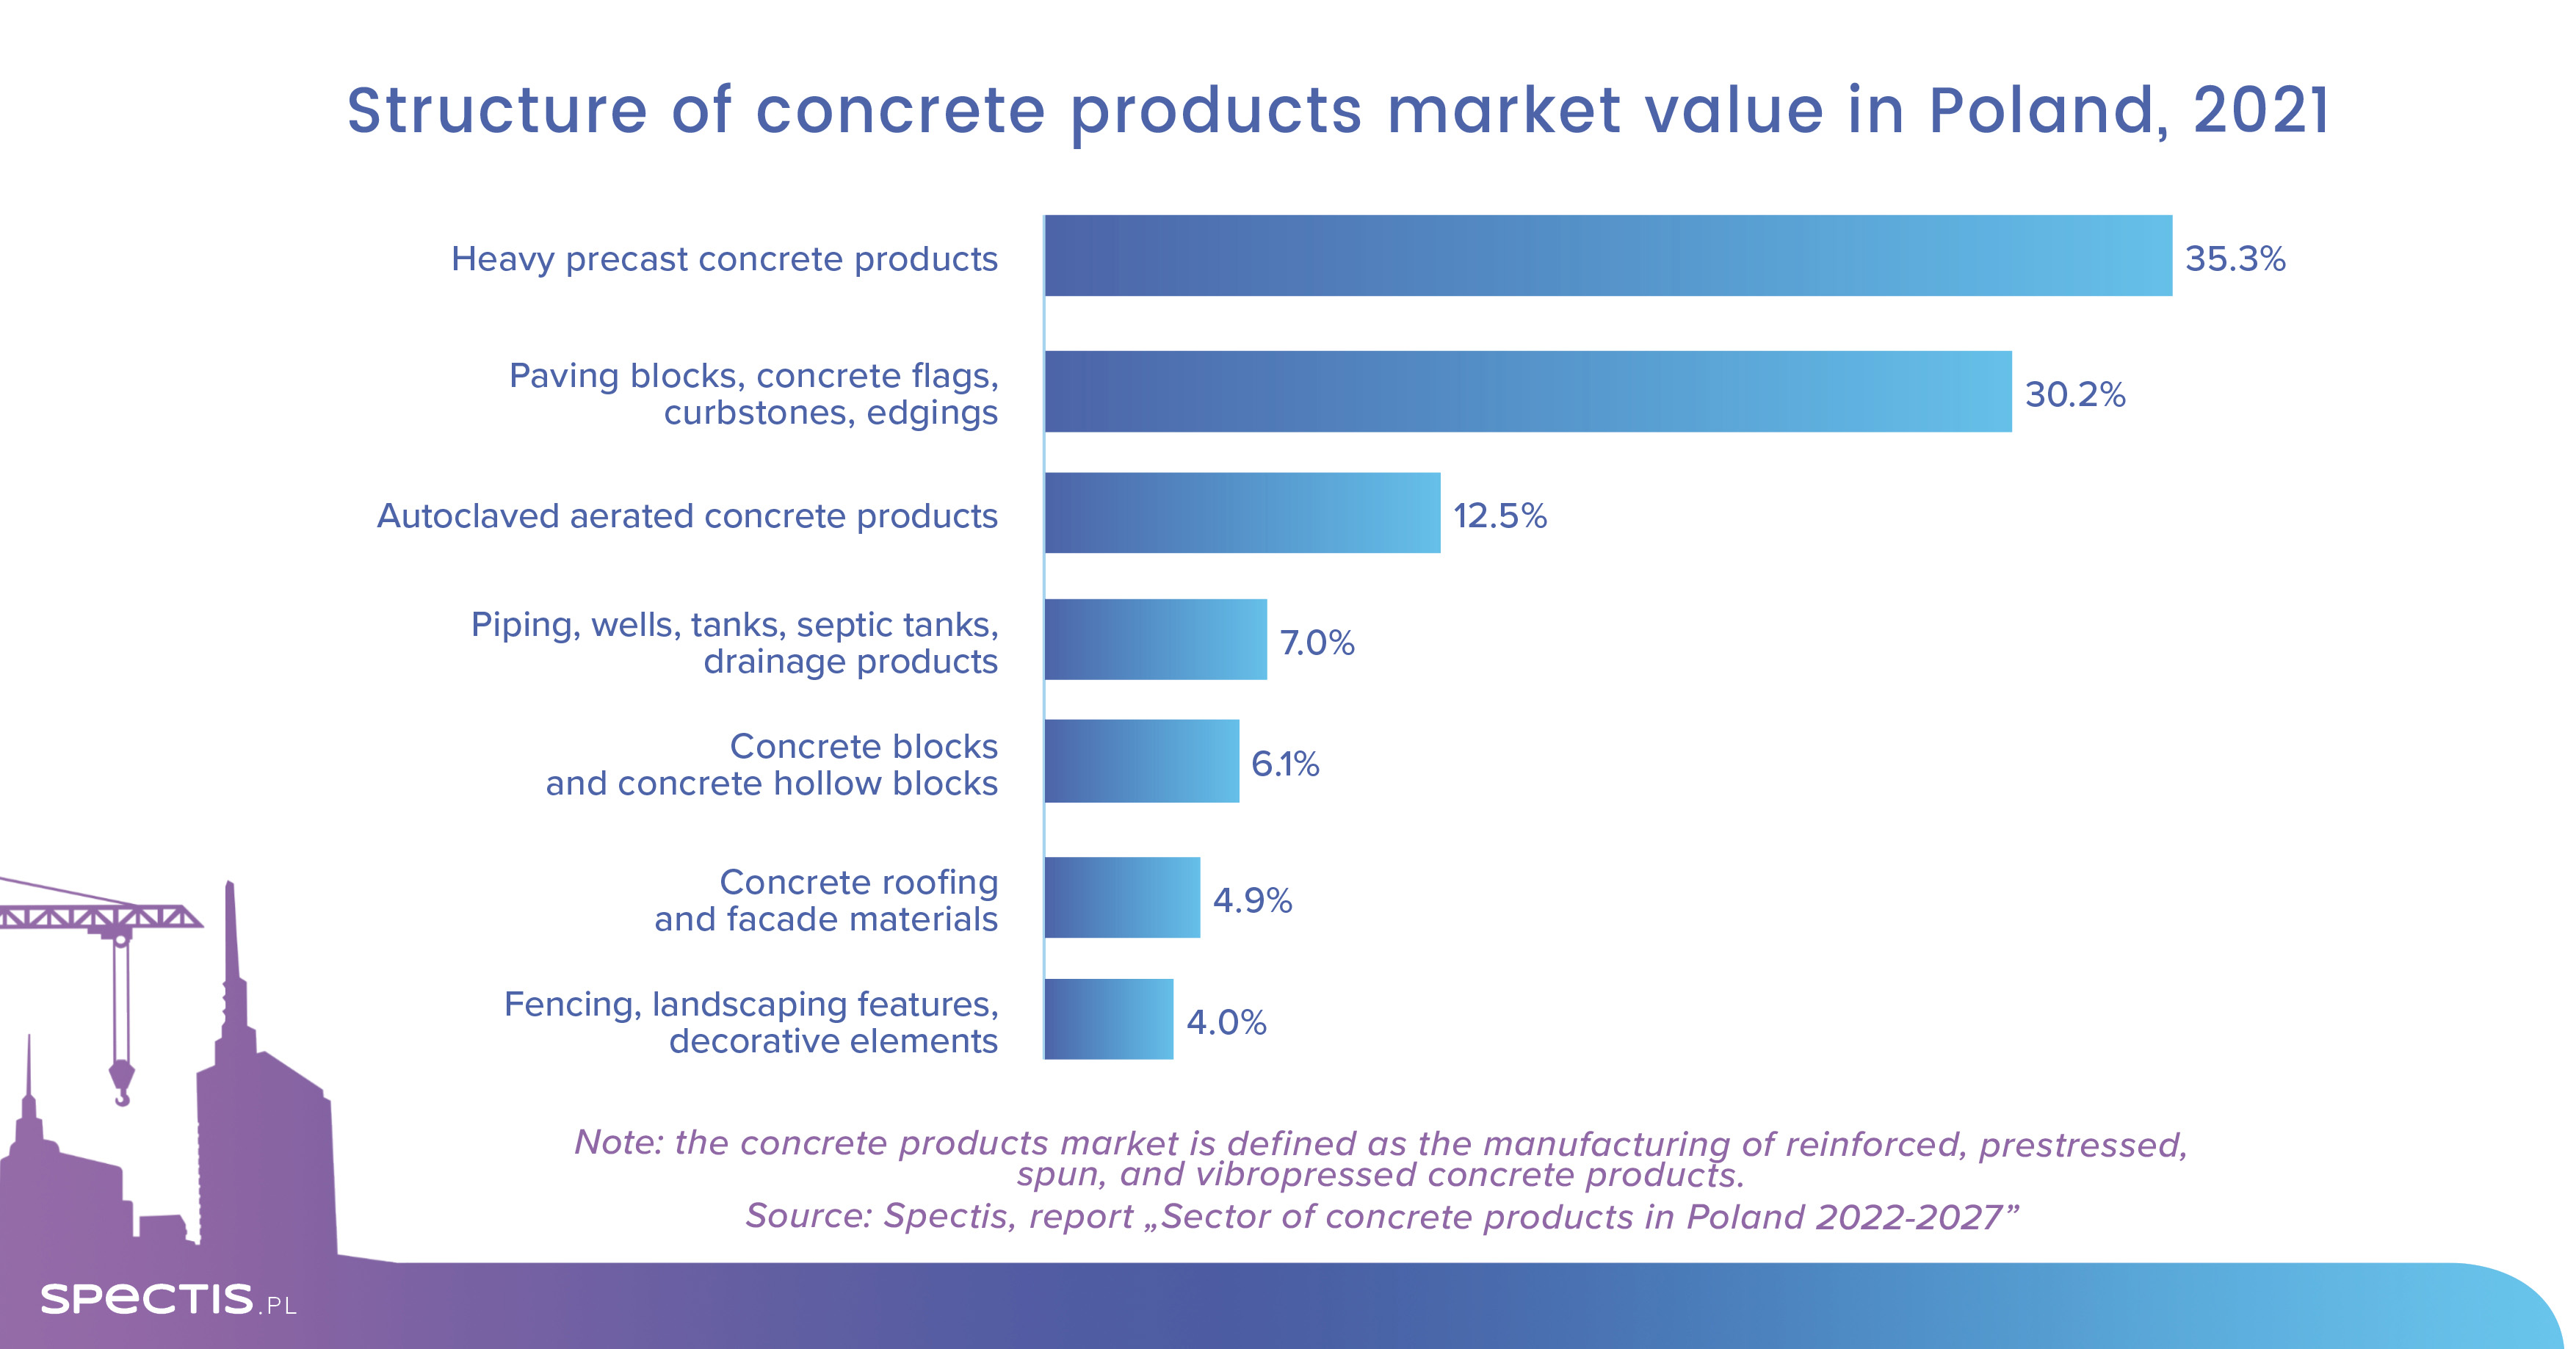 Concrete products market in Poland to reach PLN 12bn by 2023